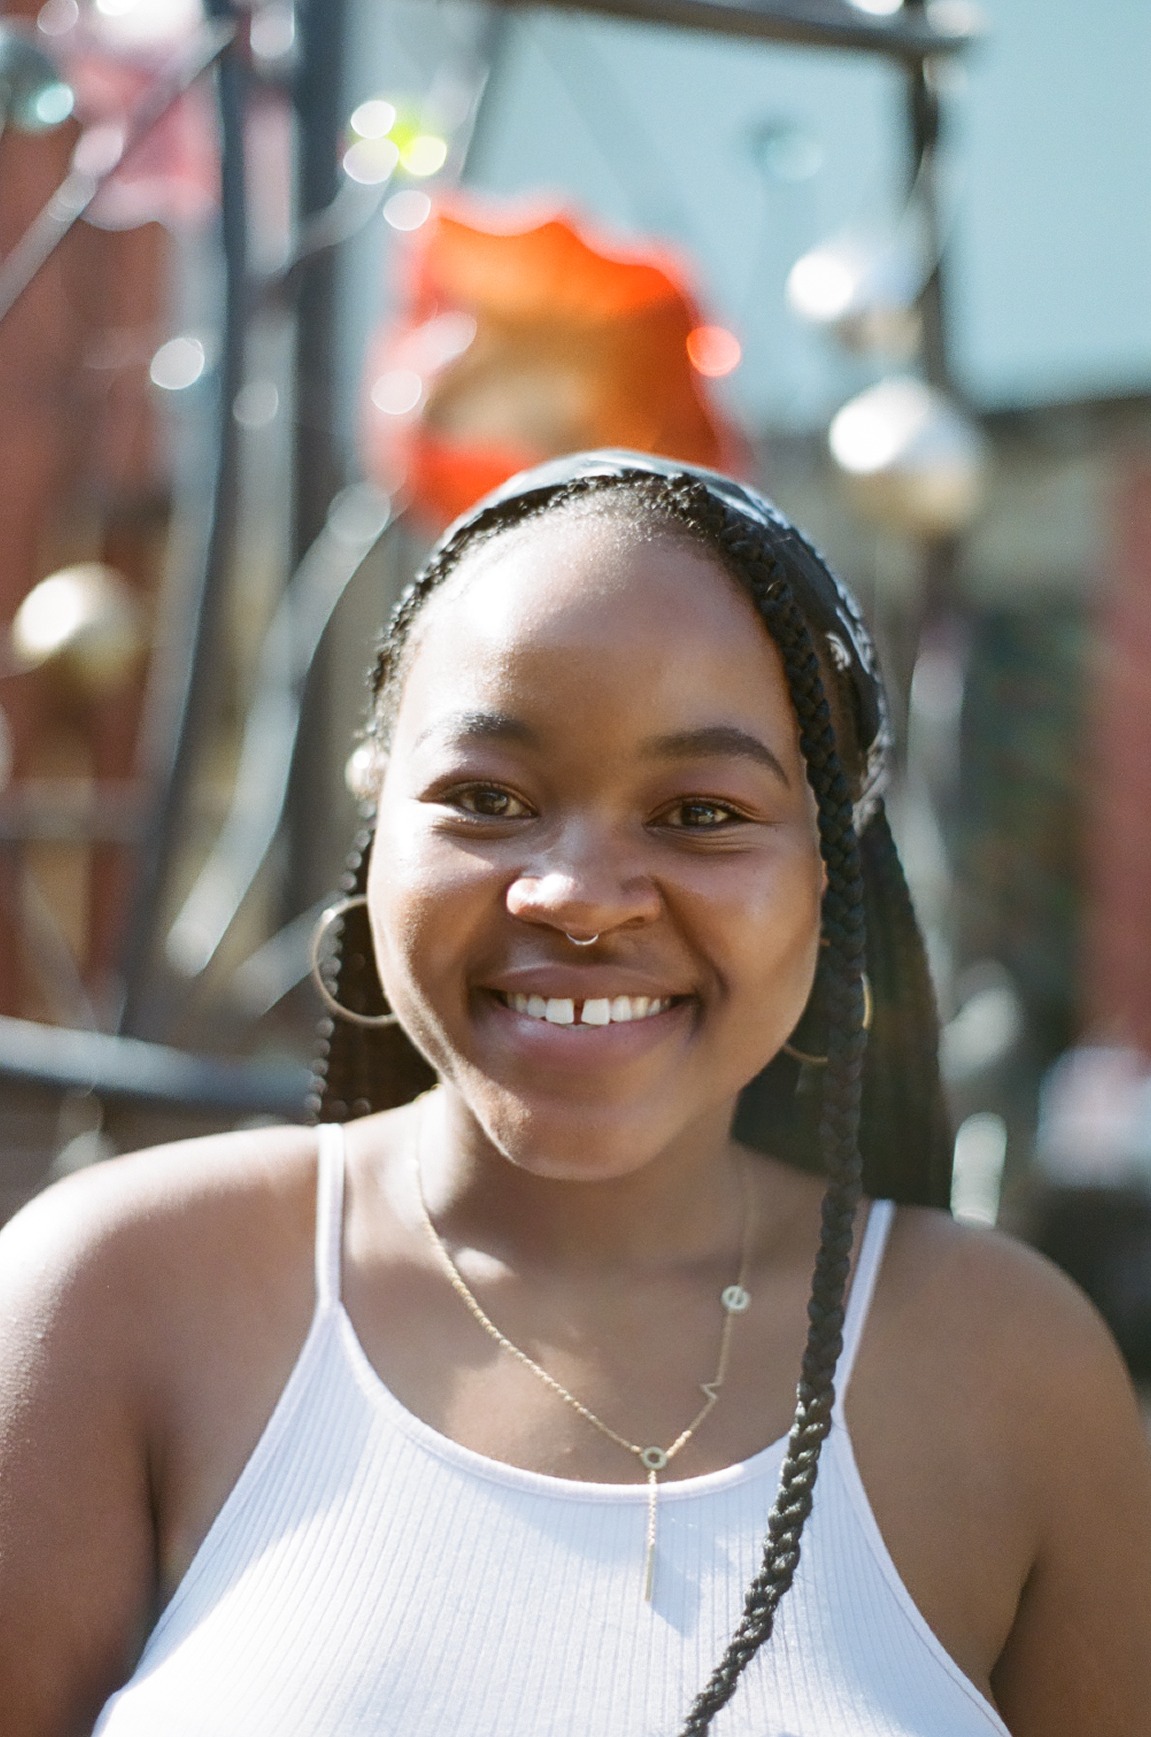 Photo portrait of young African woman smiling with braids and a nose ring, wearing a white top.